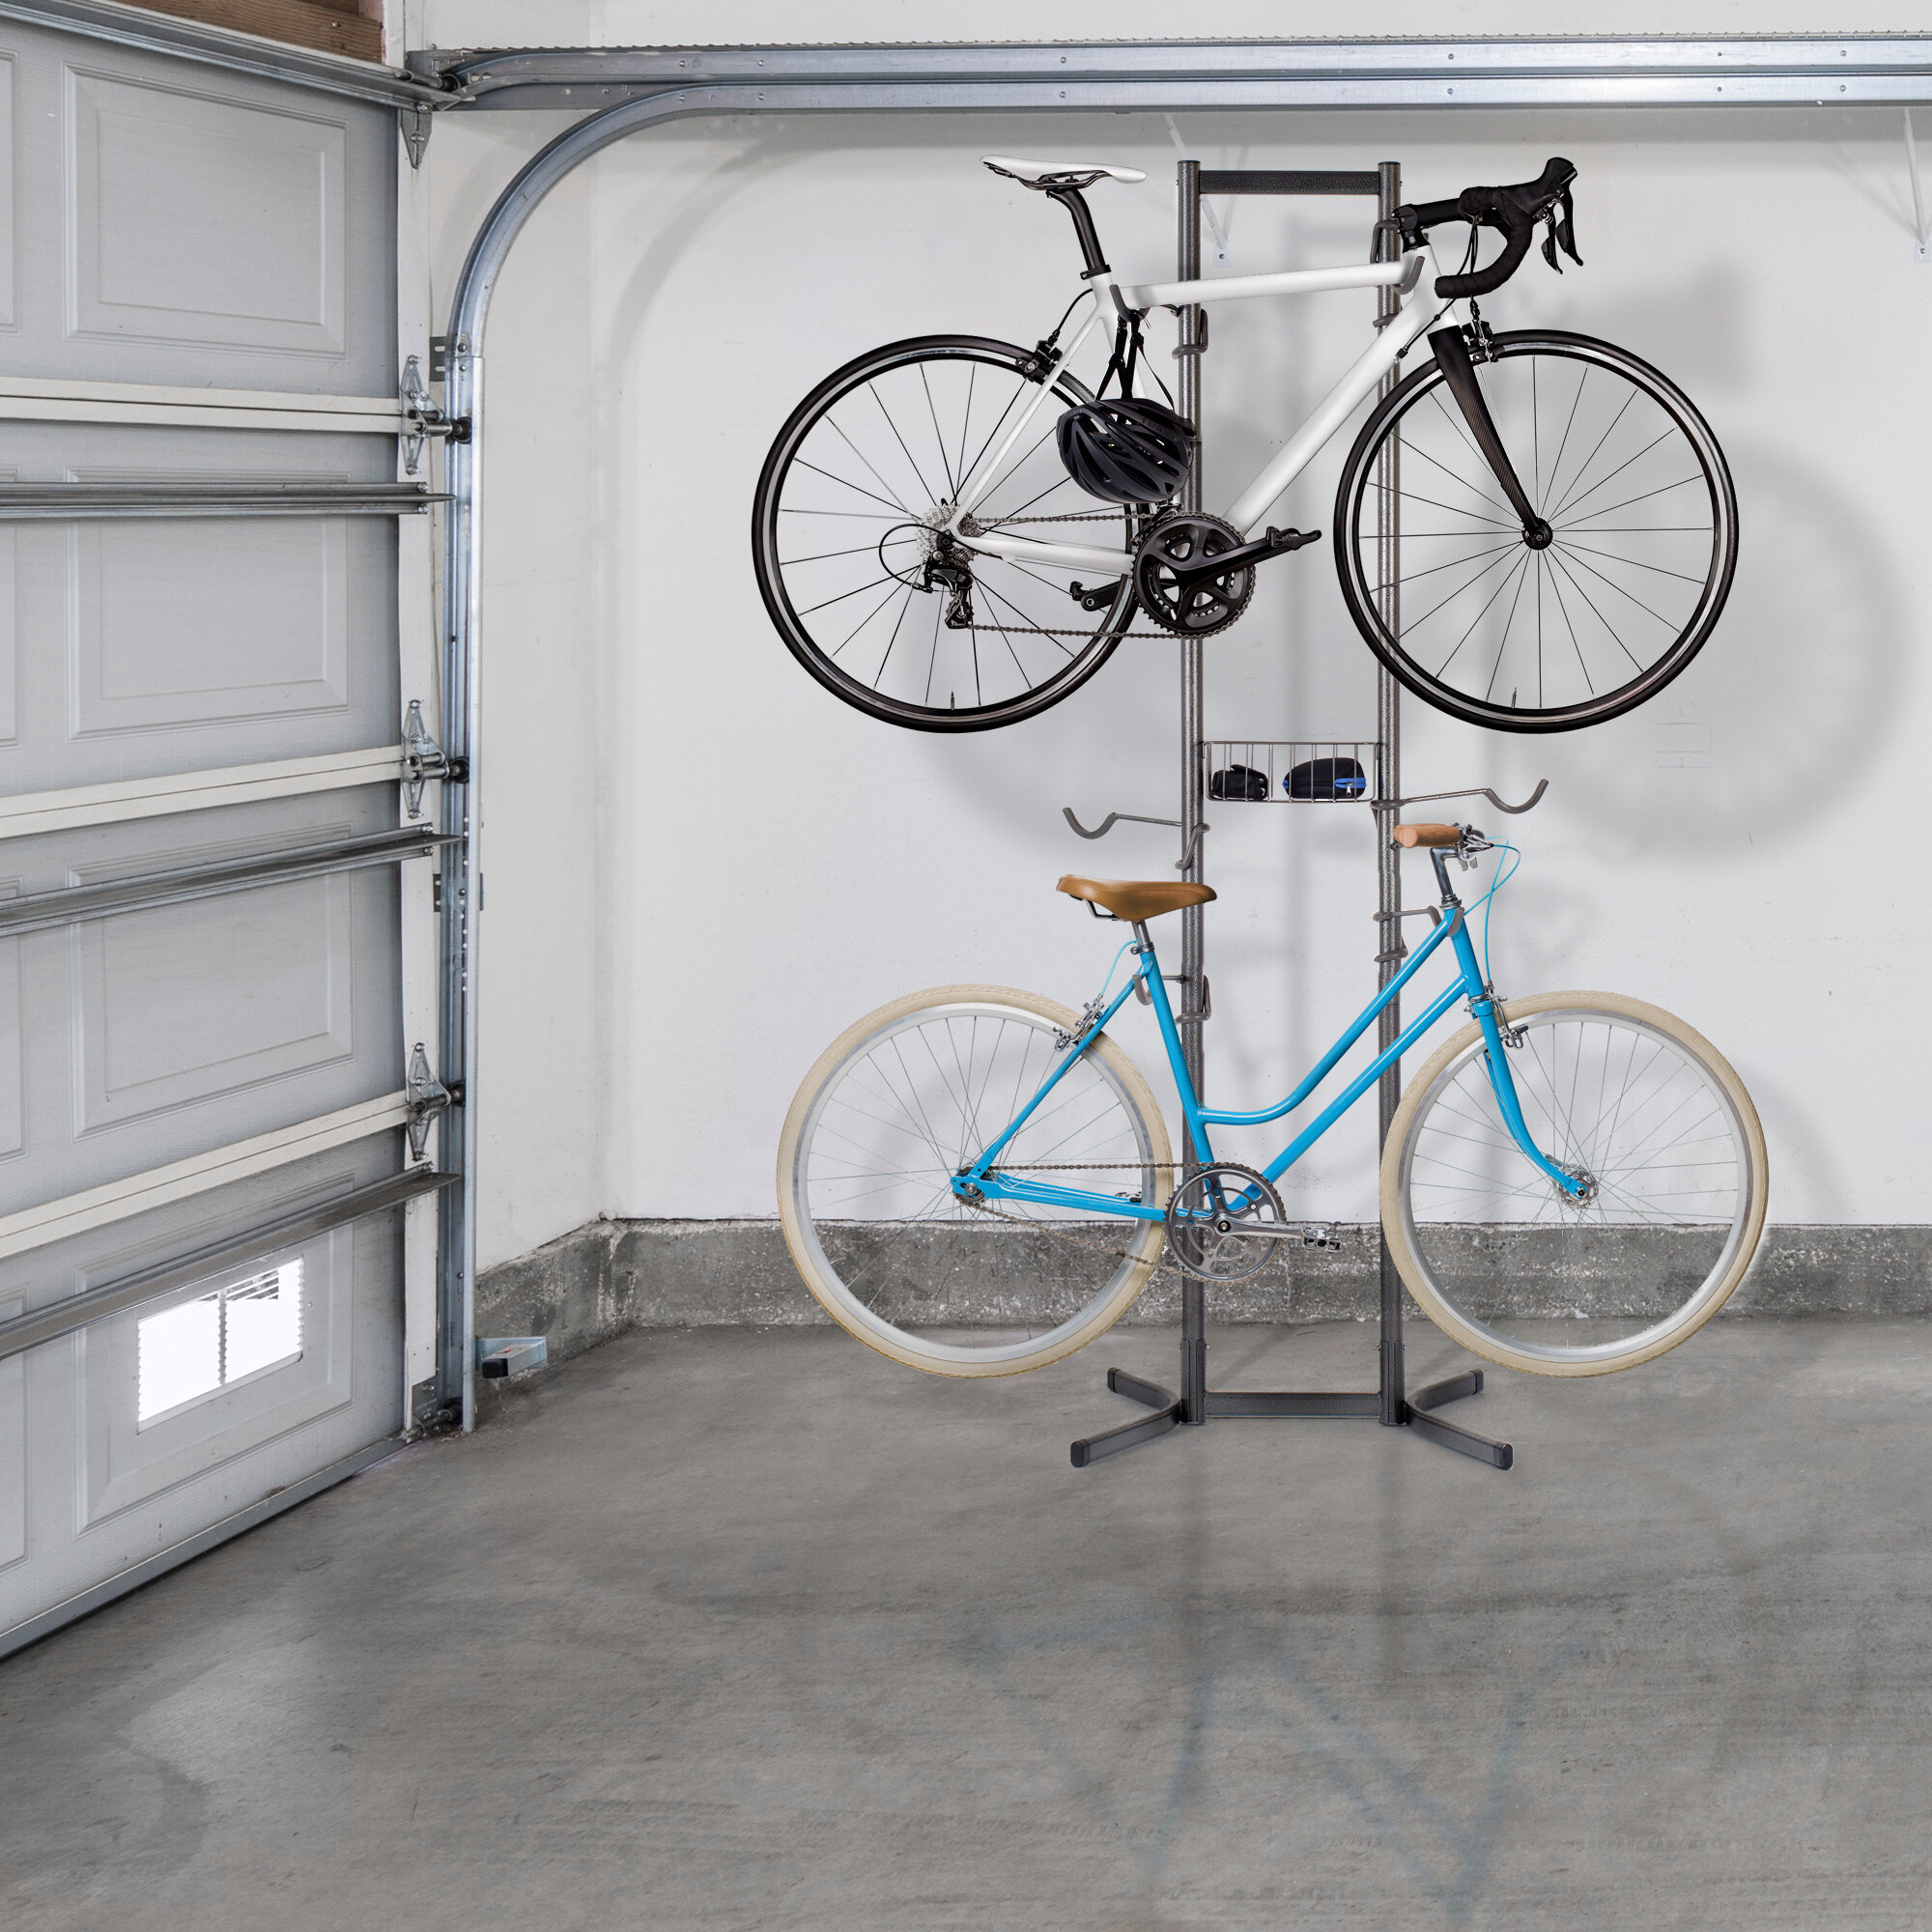 Four Bike Free-Standing Rack With Basket